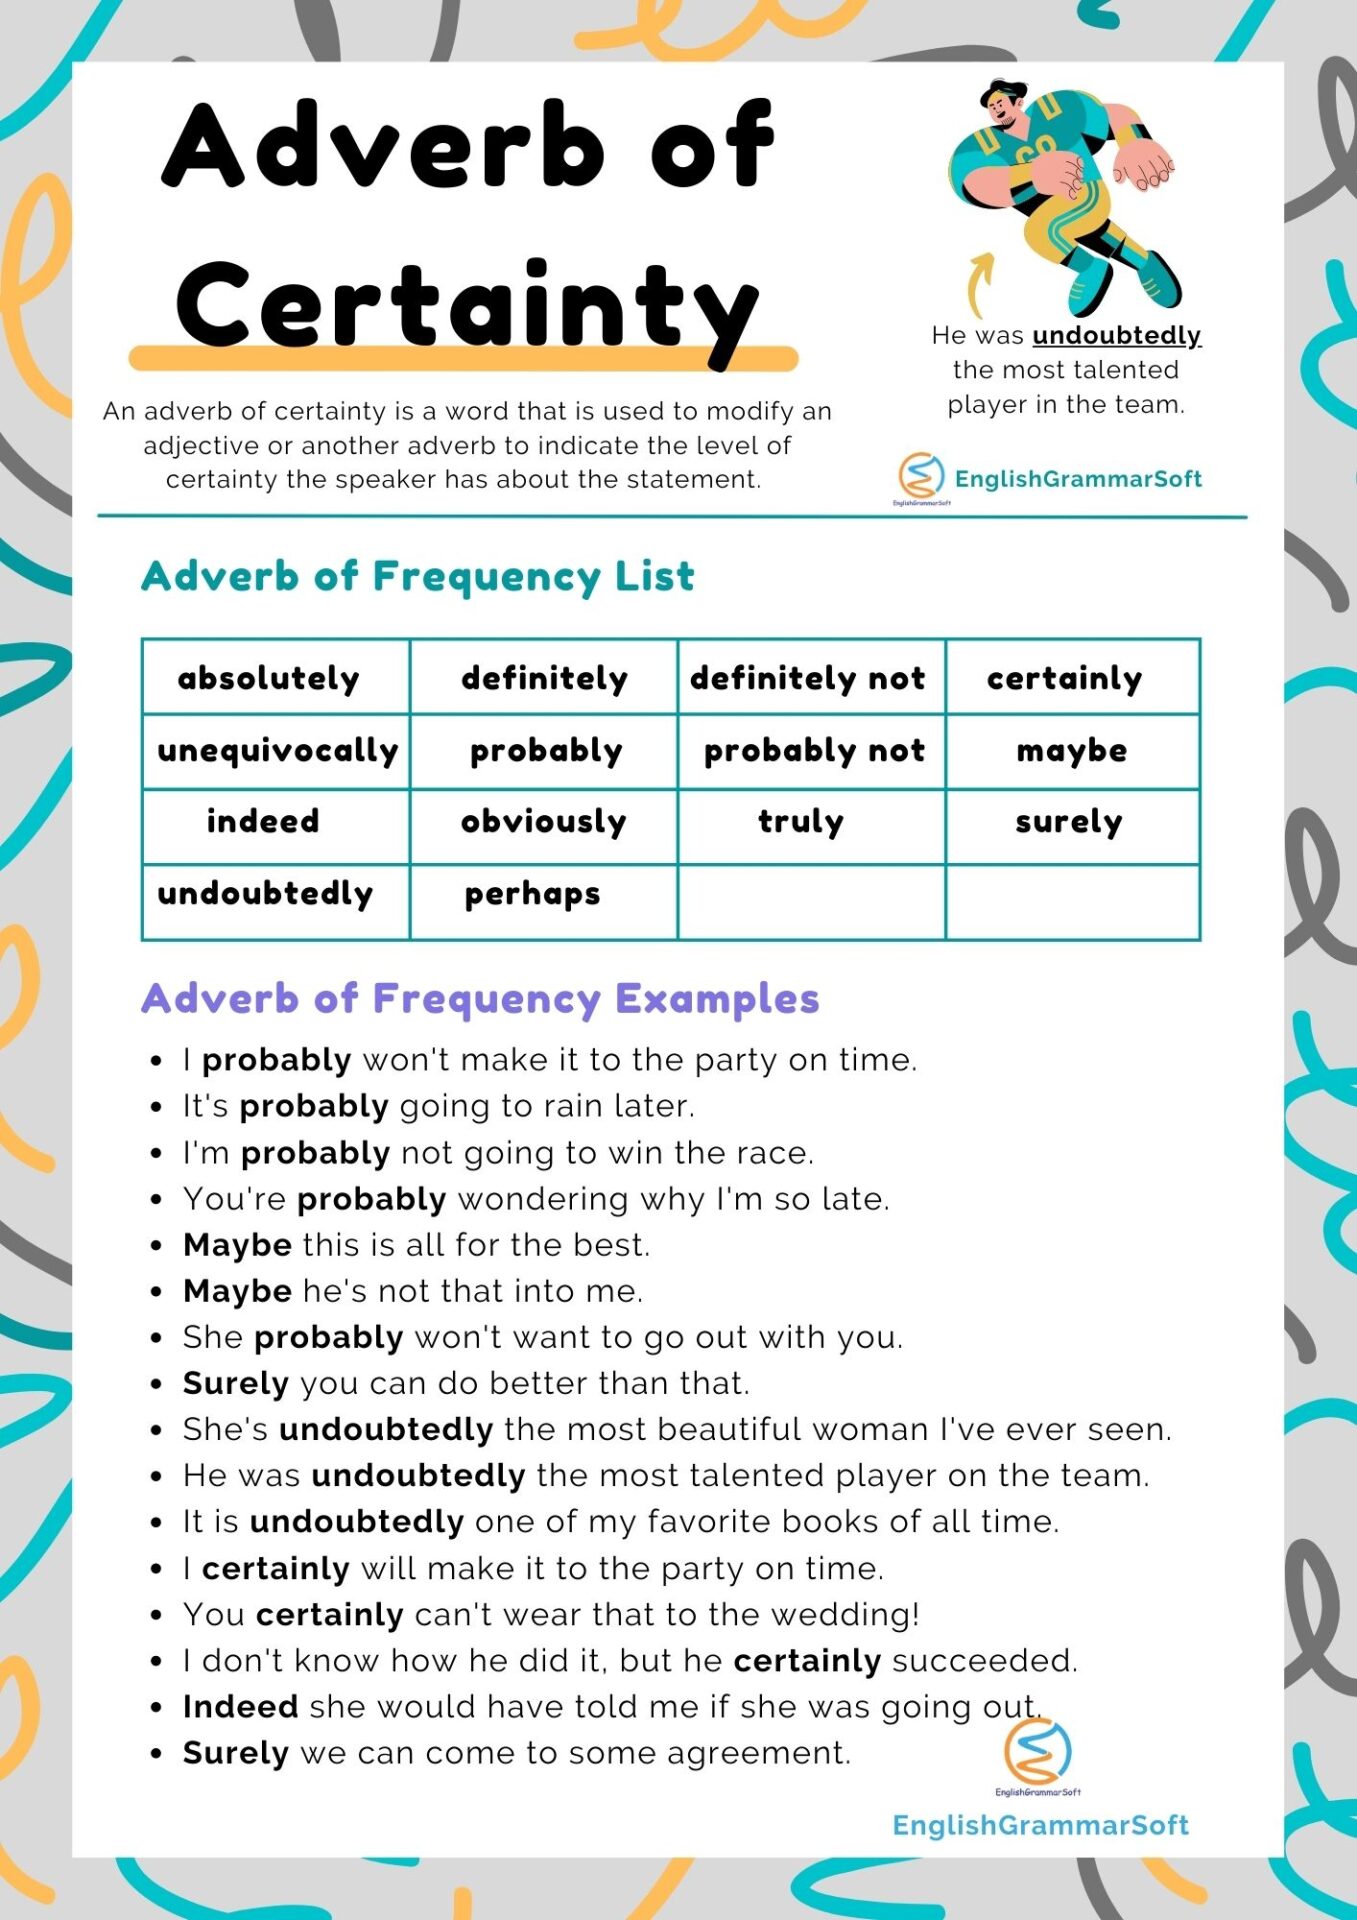 Adverb of Certainty List and Examples